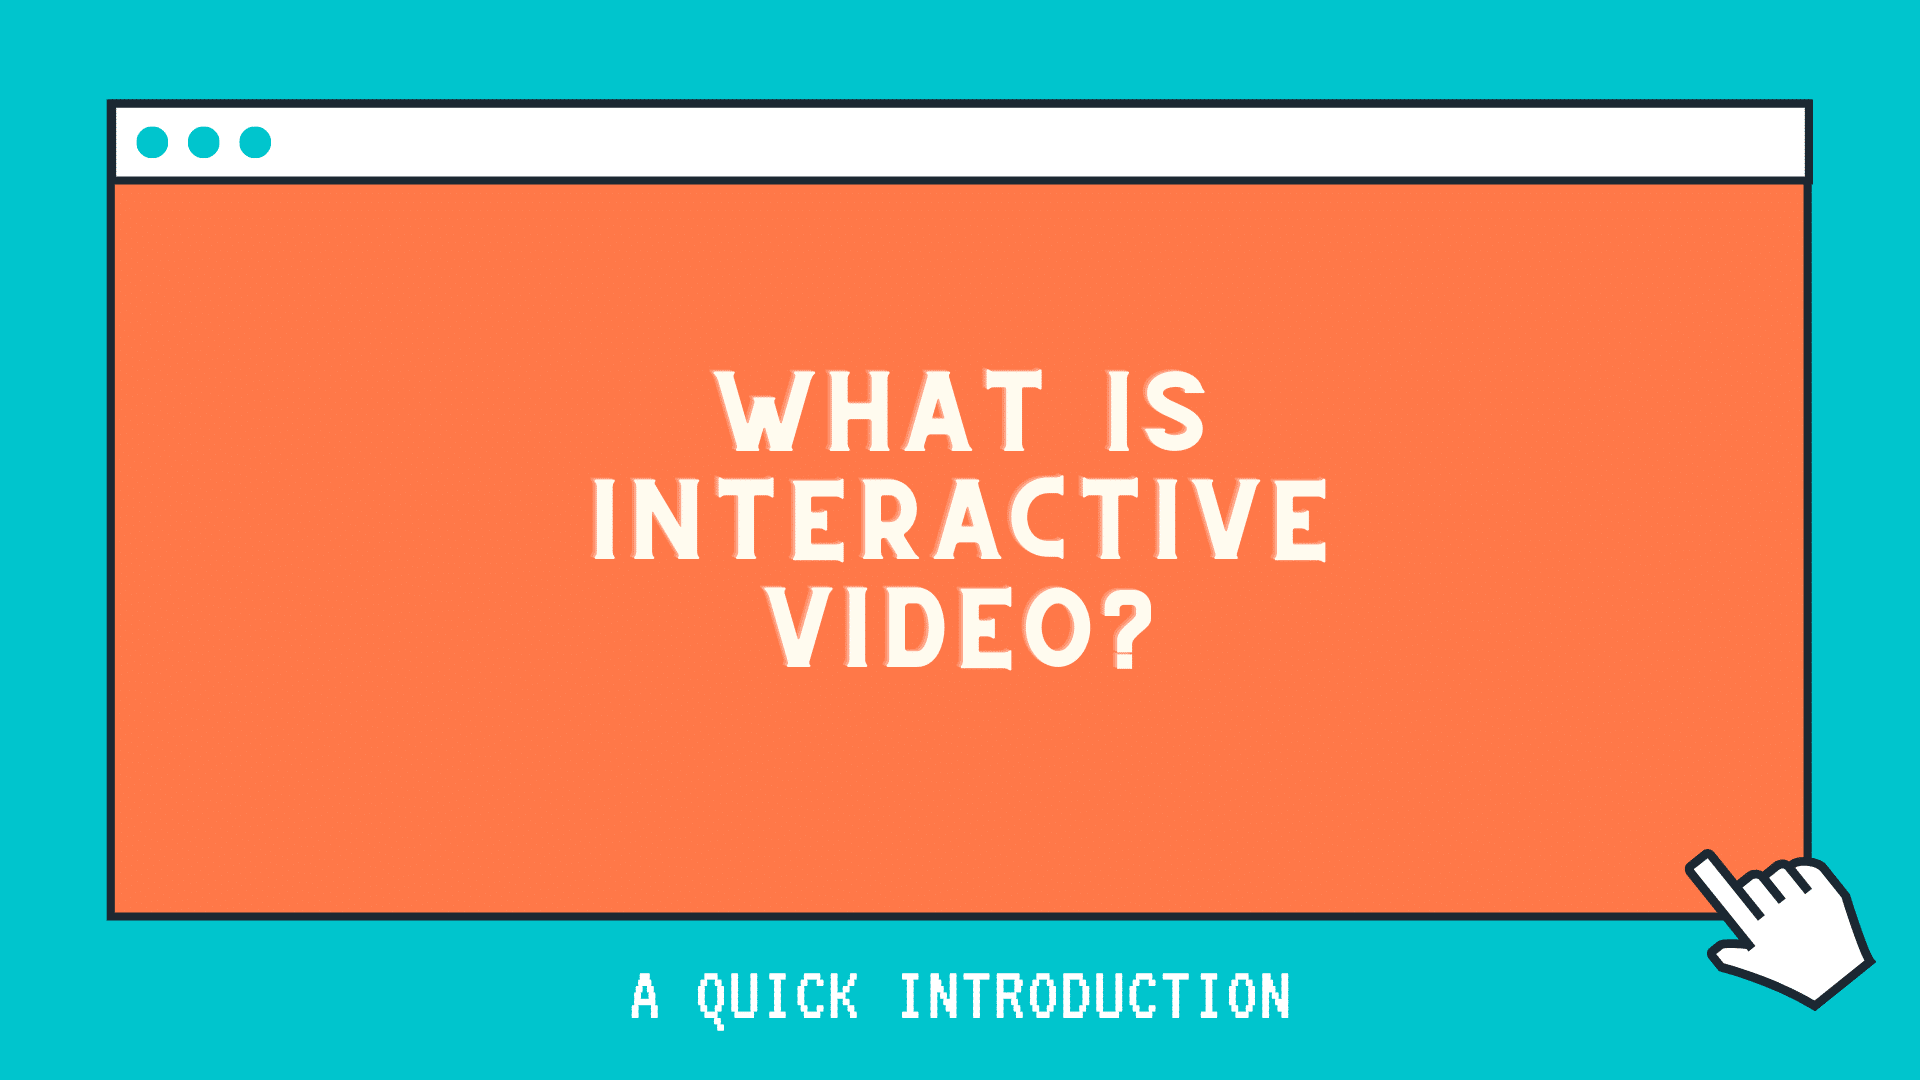 What is interactive video? A quick introduction